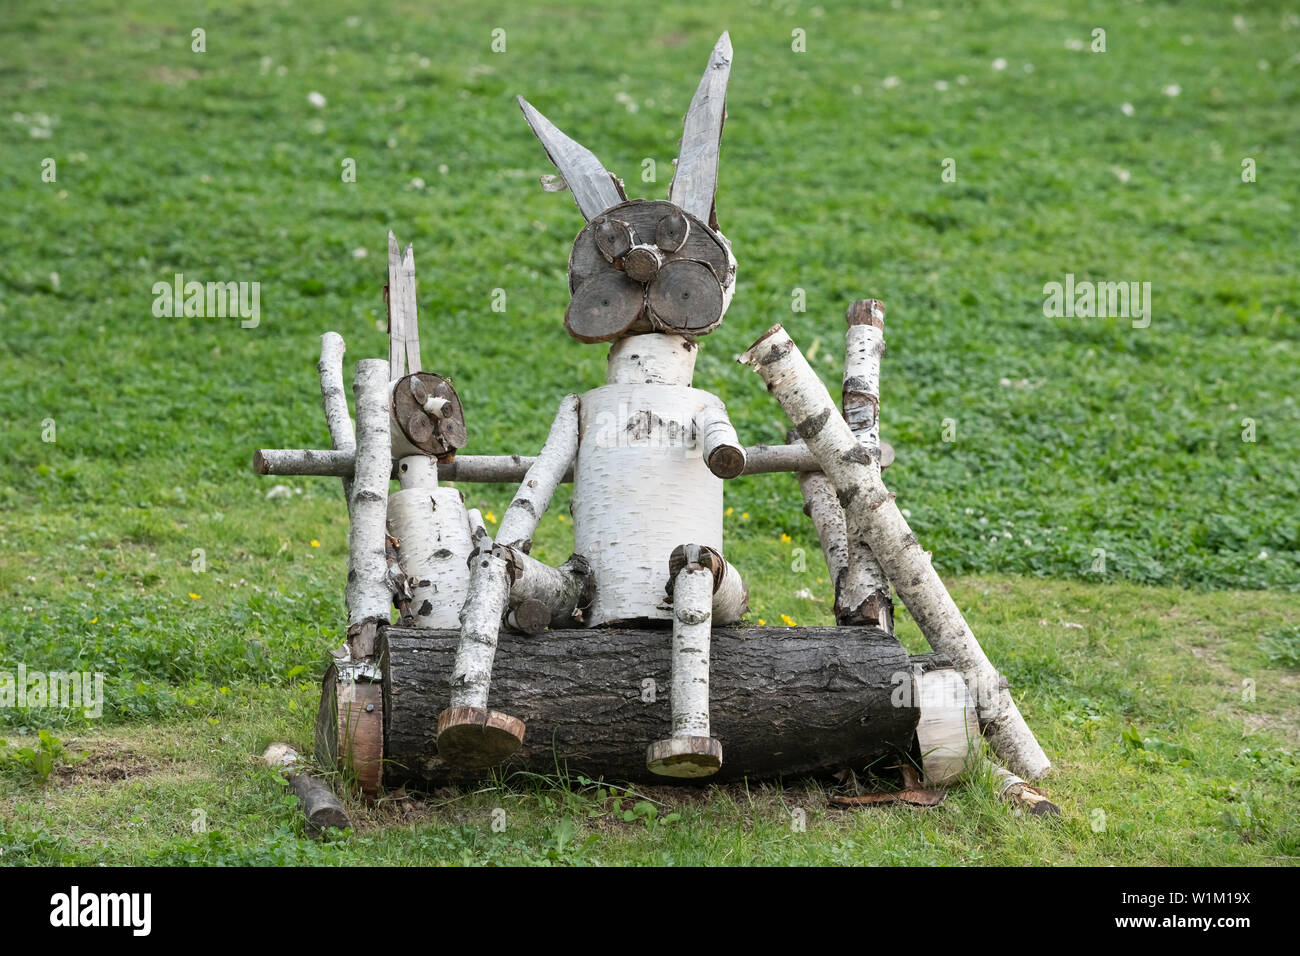 description: hand-made wooden sculpture of birch on the background of grass in the Park Stock Photo